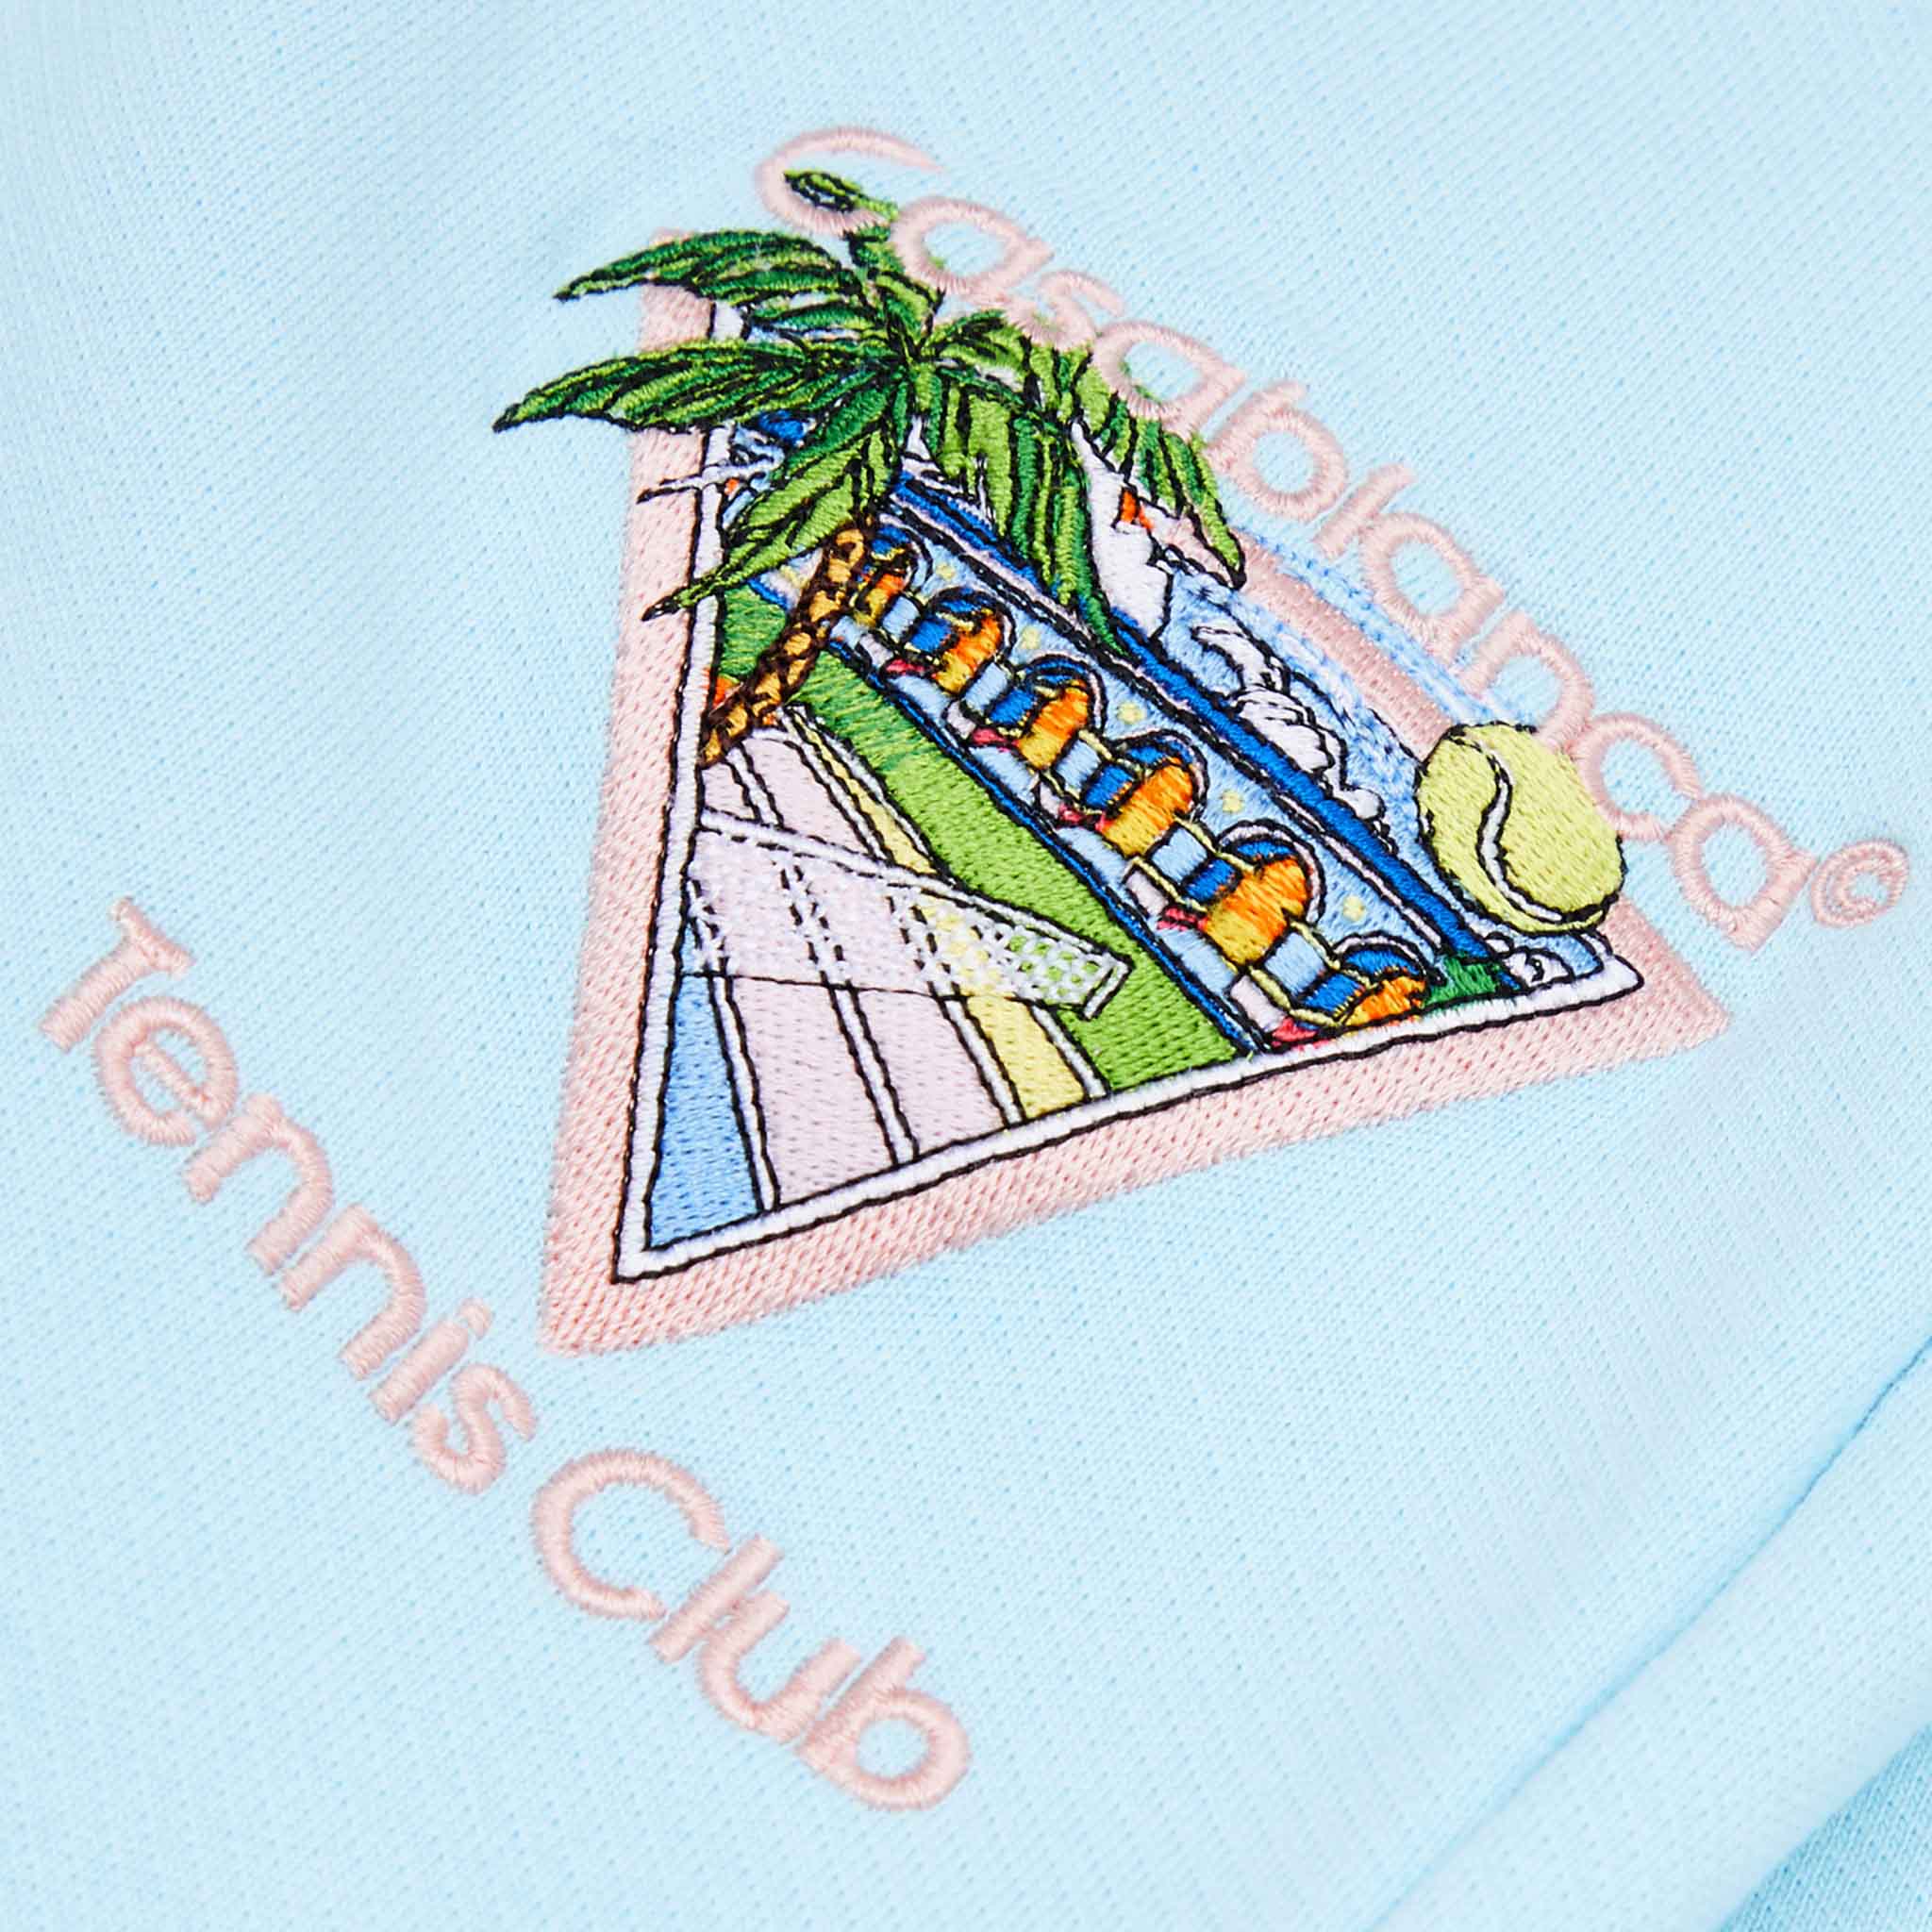 Casablanca Tennis Club Icon Embroidered Sweatpants in Pale Blue